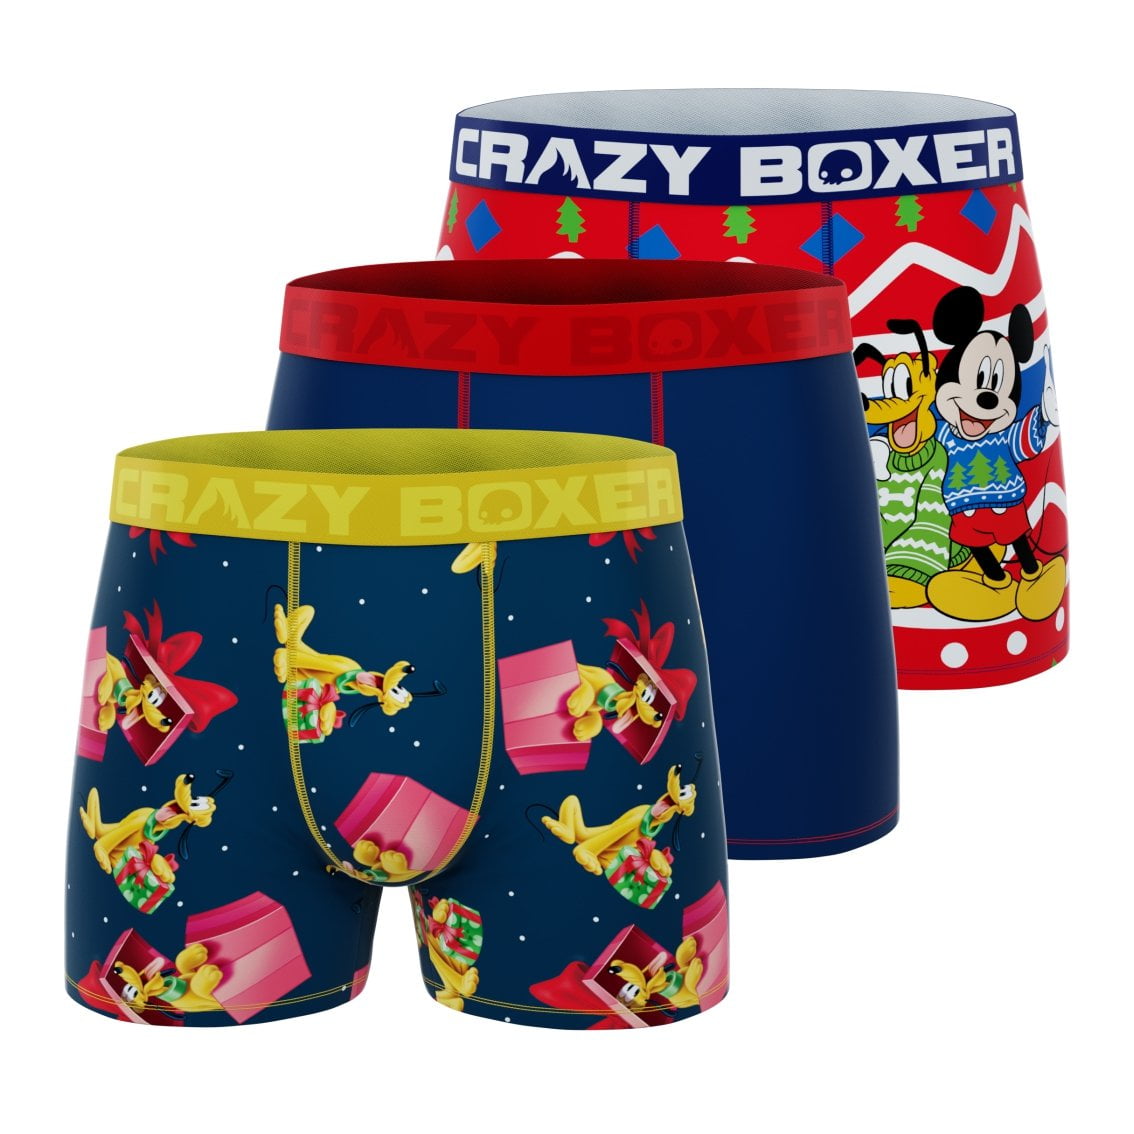 CRAZYBOXER Disney Mickey and Pluto Xmas Male Boxer Briefs 3 pack ...